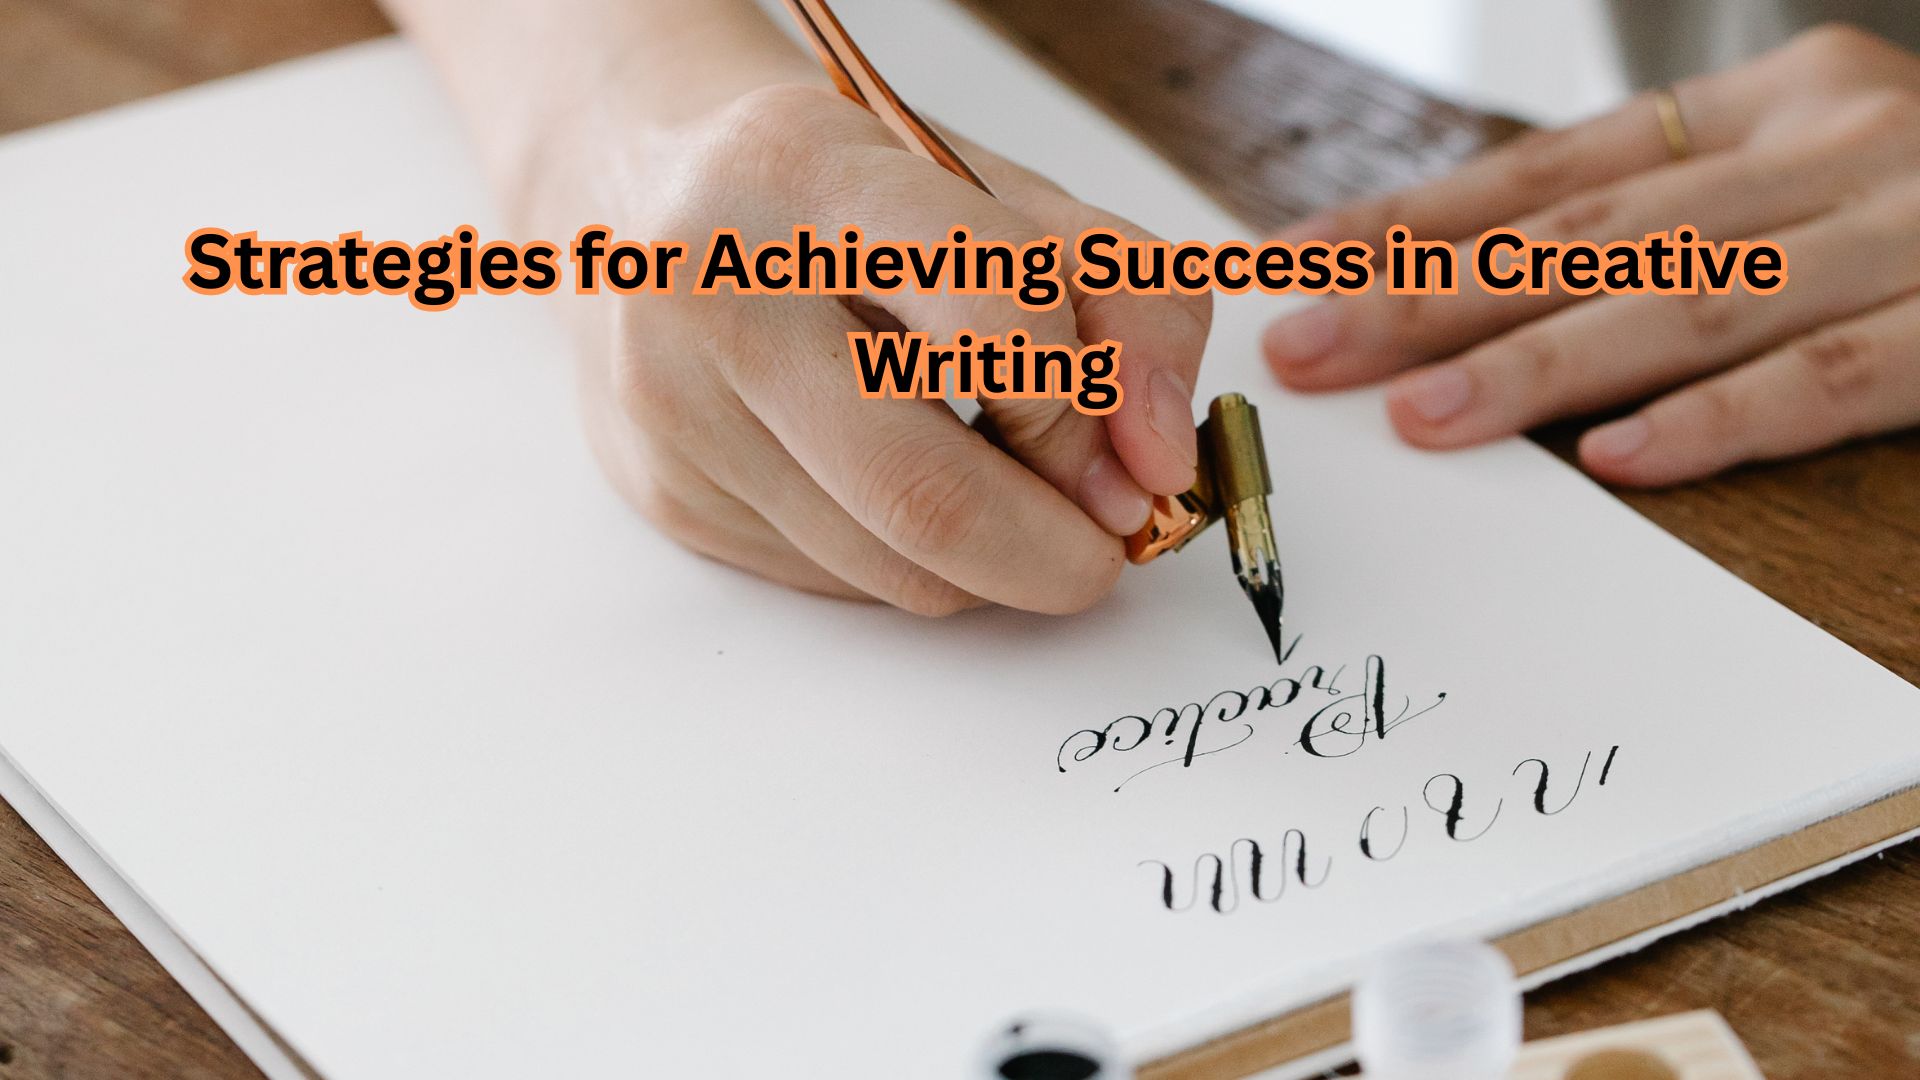 Strategies for Achieving Success in Creative Writing